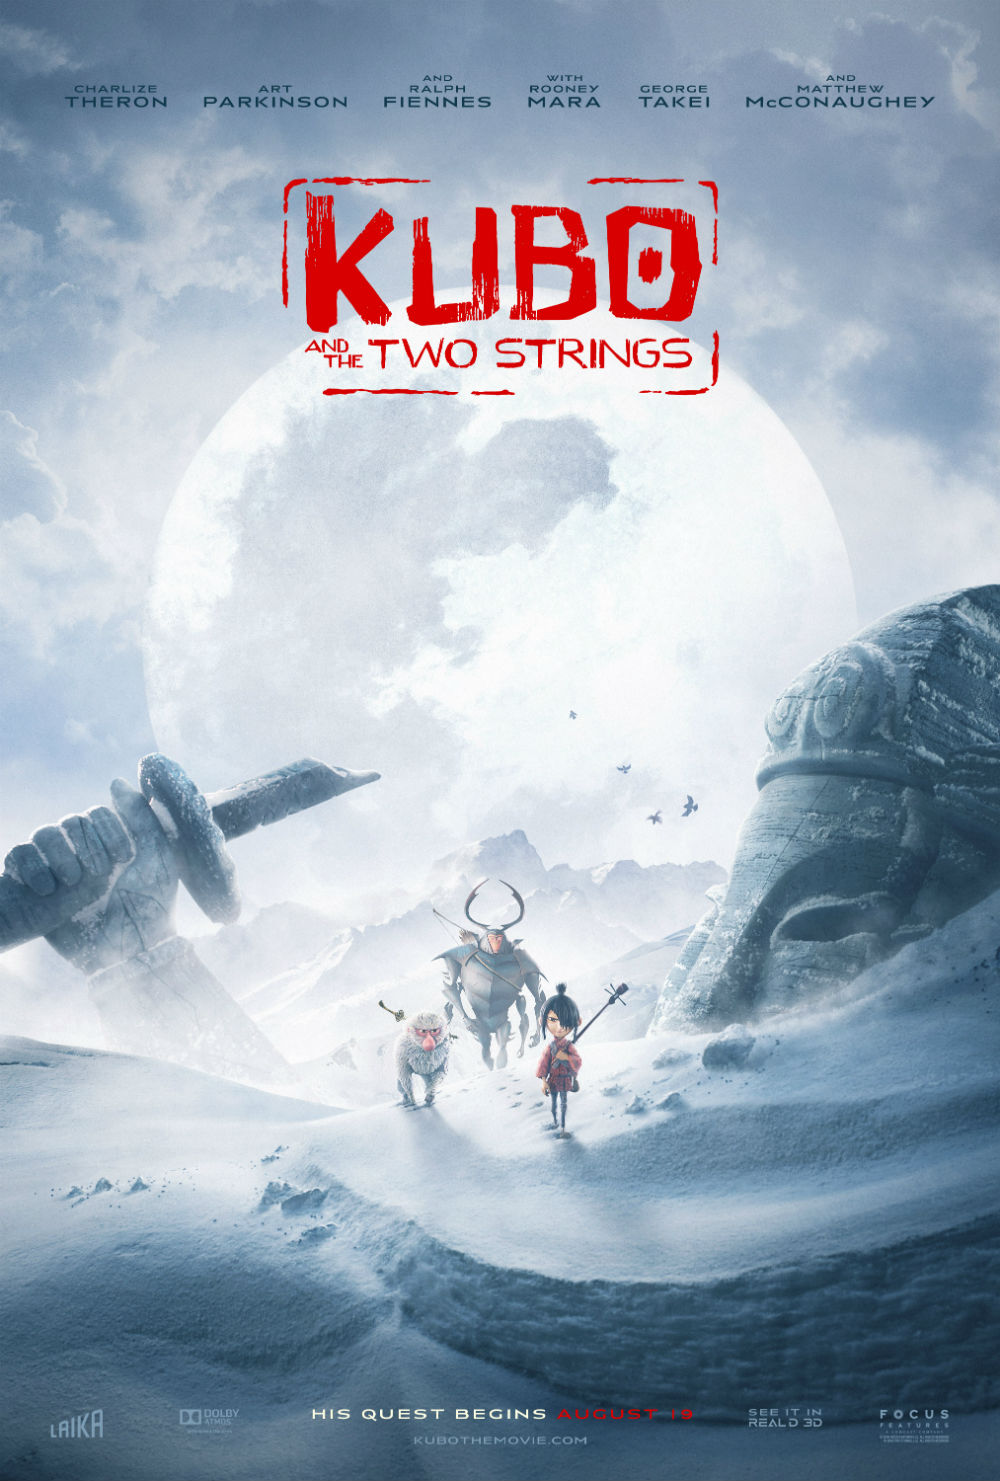 The Adventure Is Bigger Than Ever In The Last Kubo And The Two Strings Trailer 